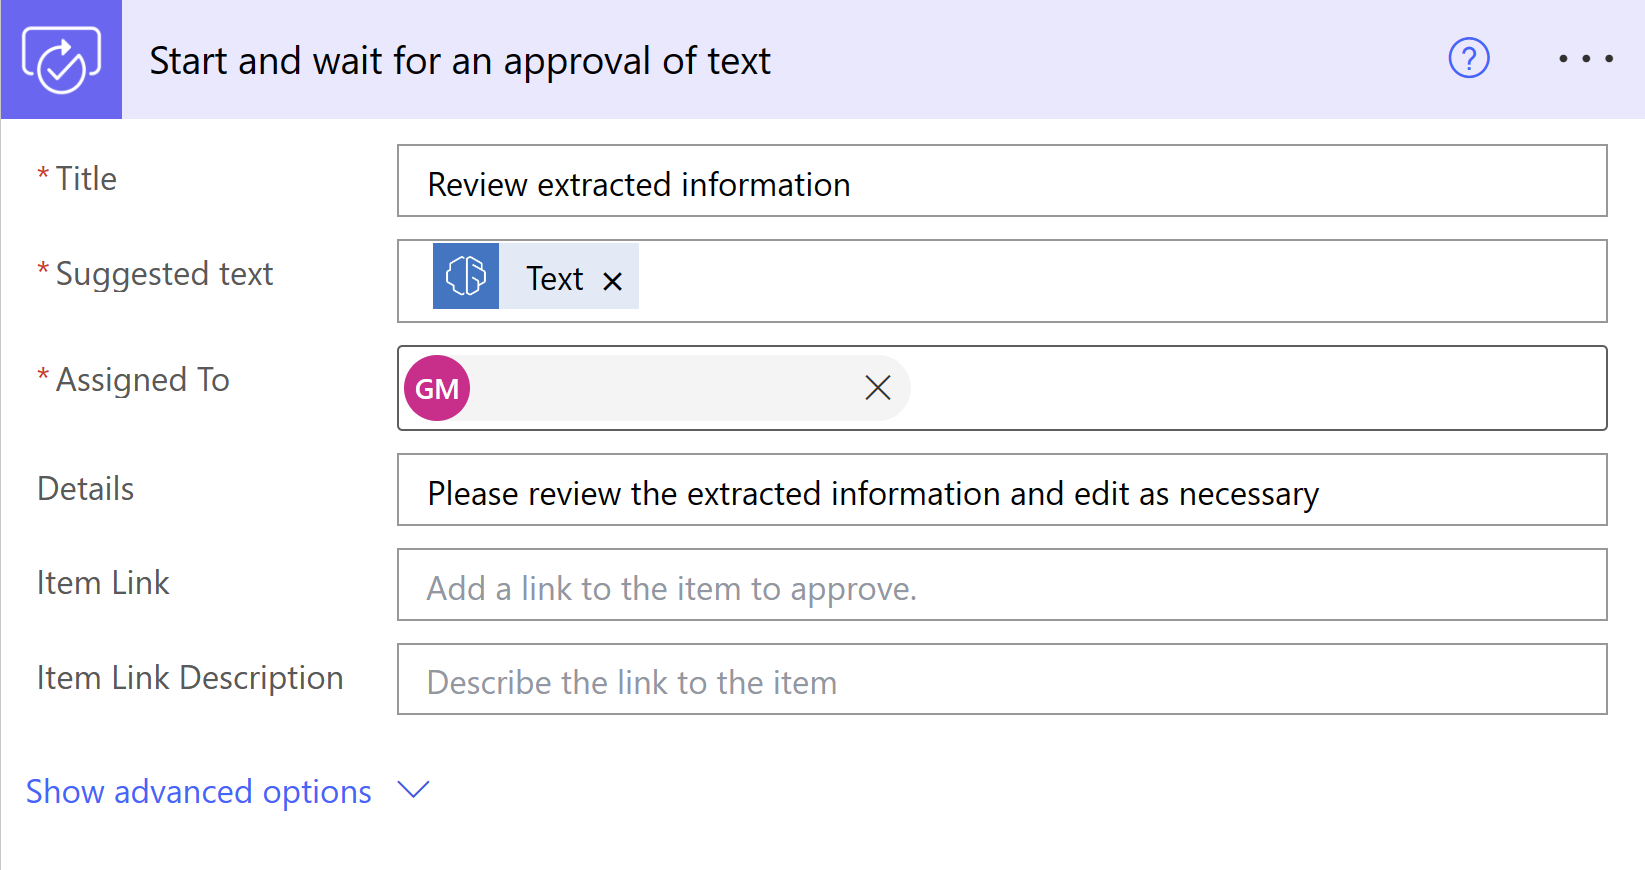 Screenshot of how the approval action should appear.